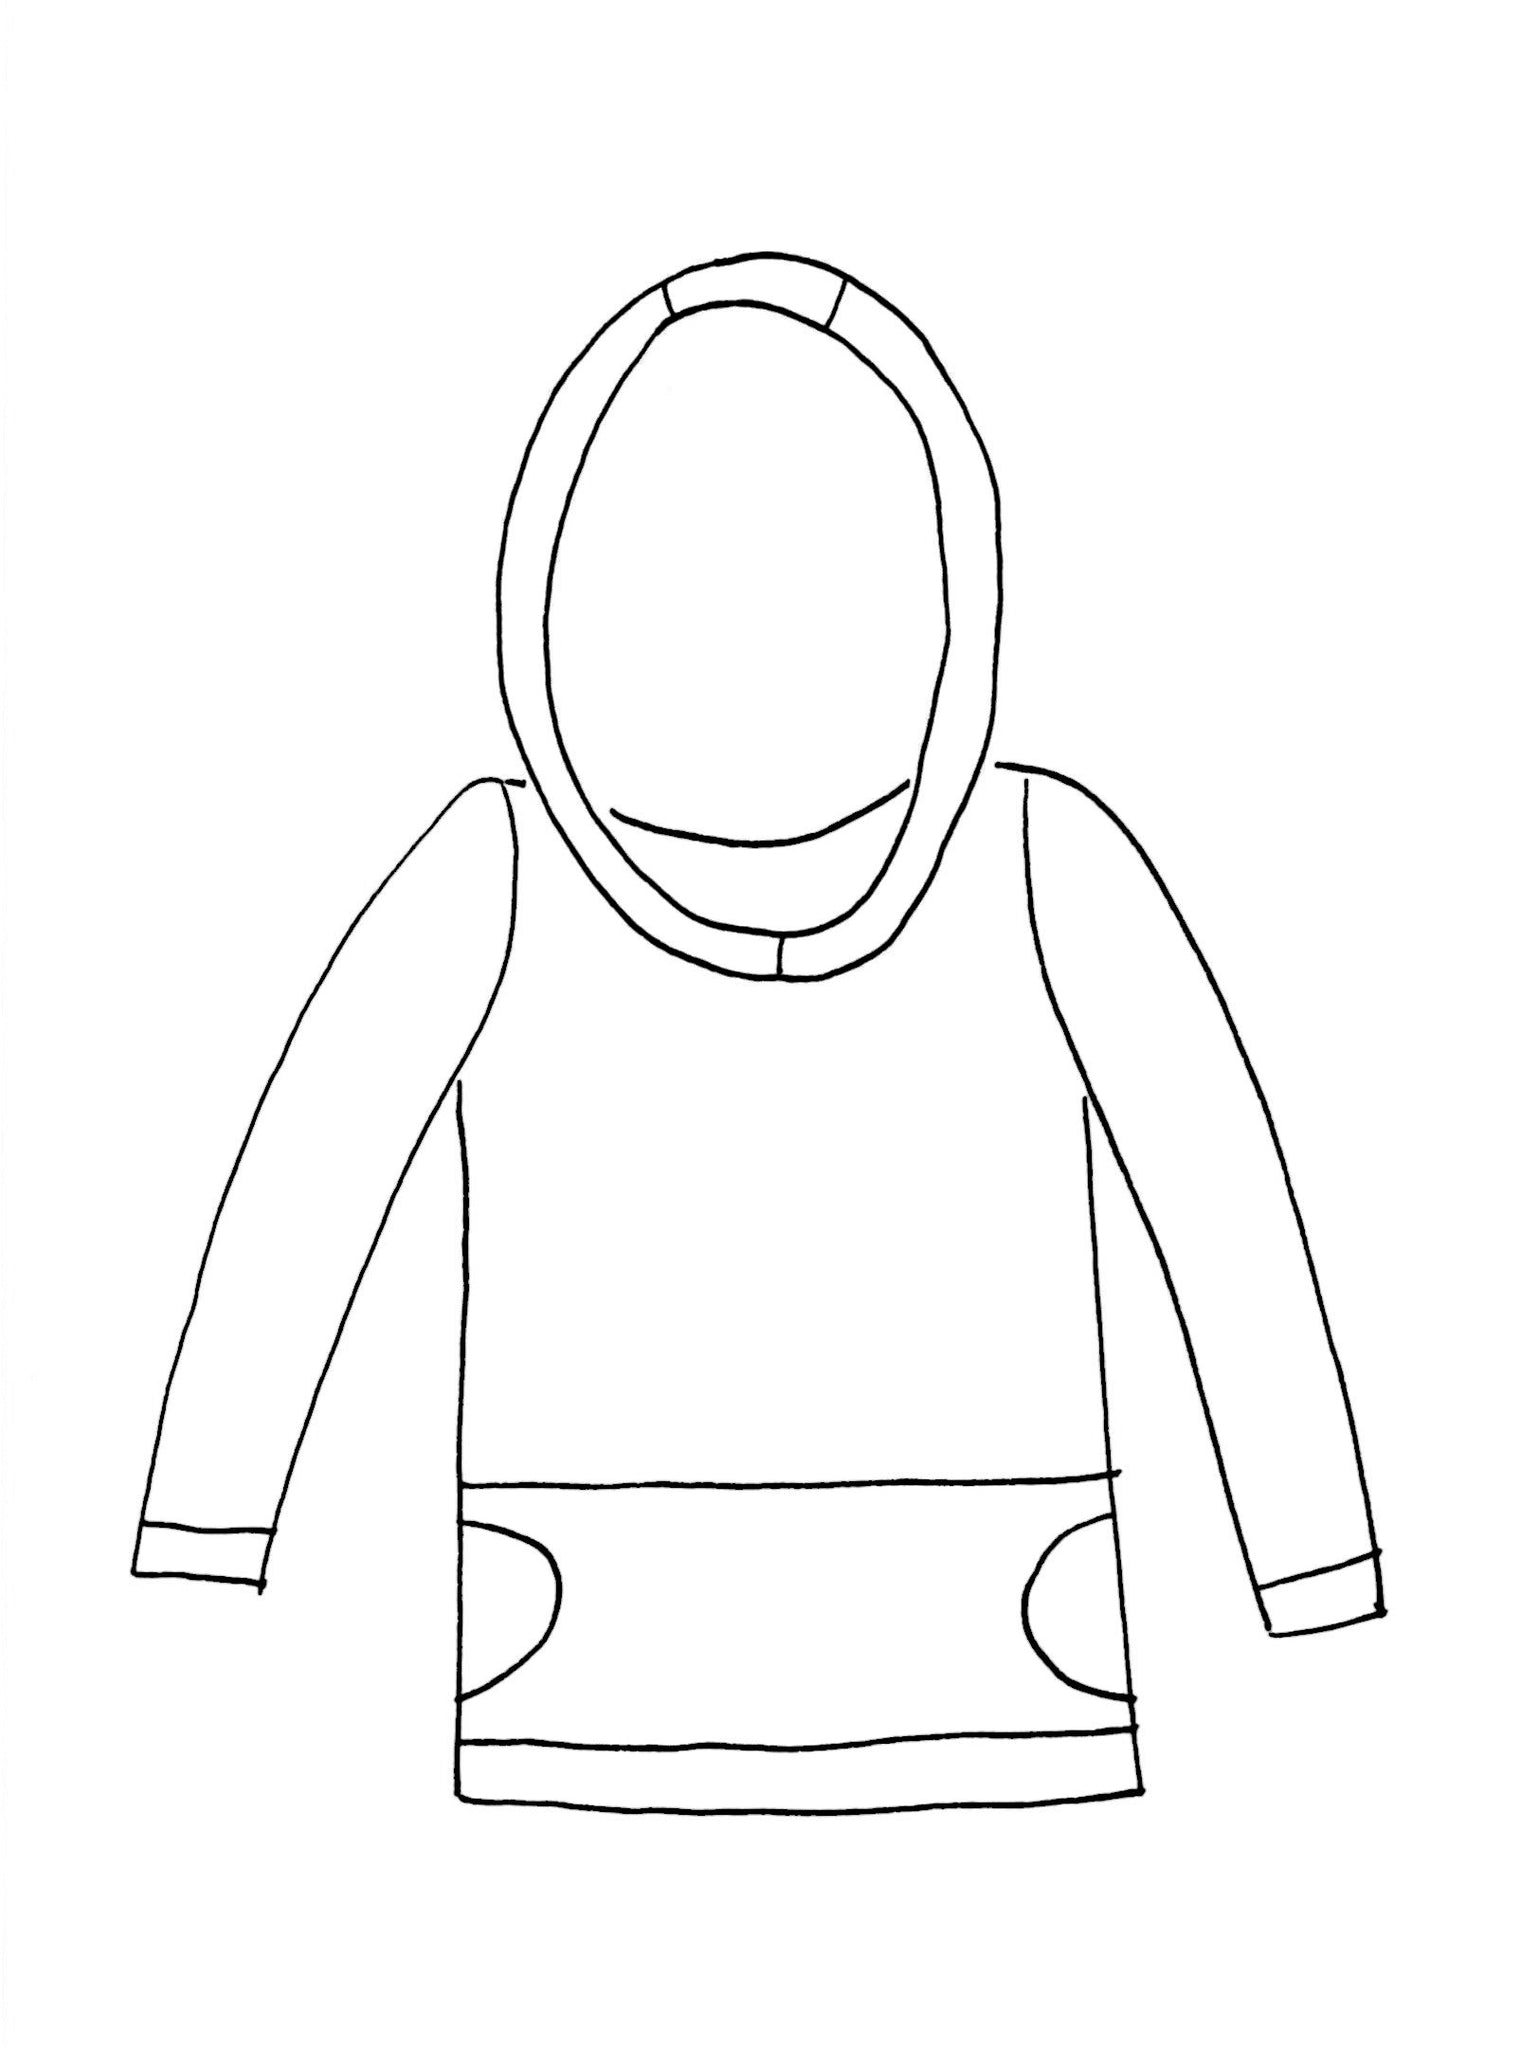 Hoodie Drawing Color : Philip Carter On Twitter Inktober Day 13